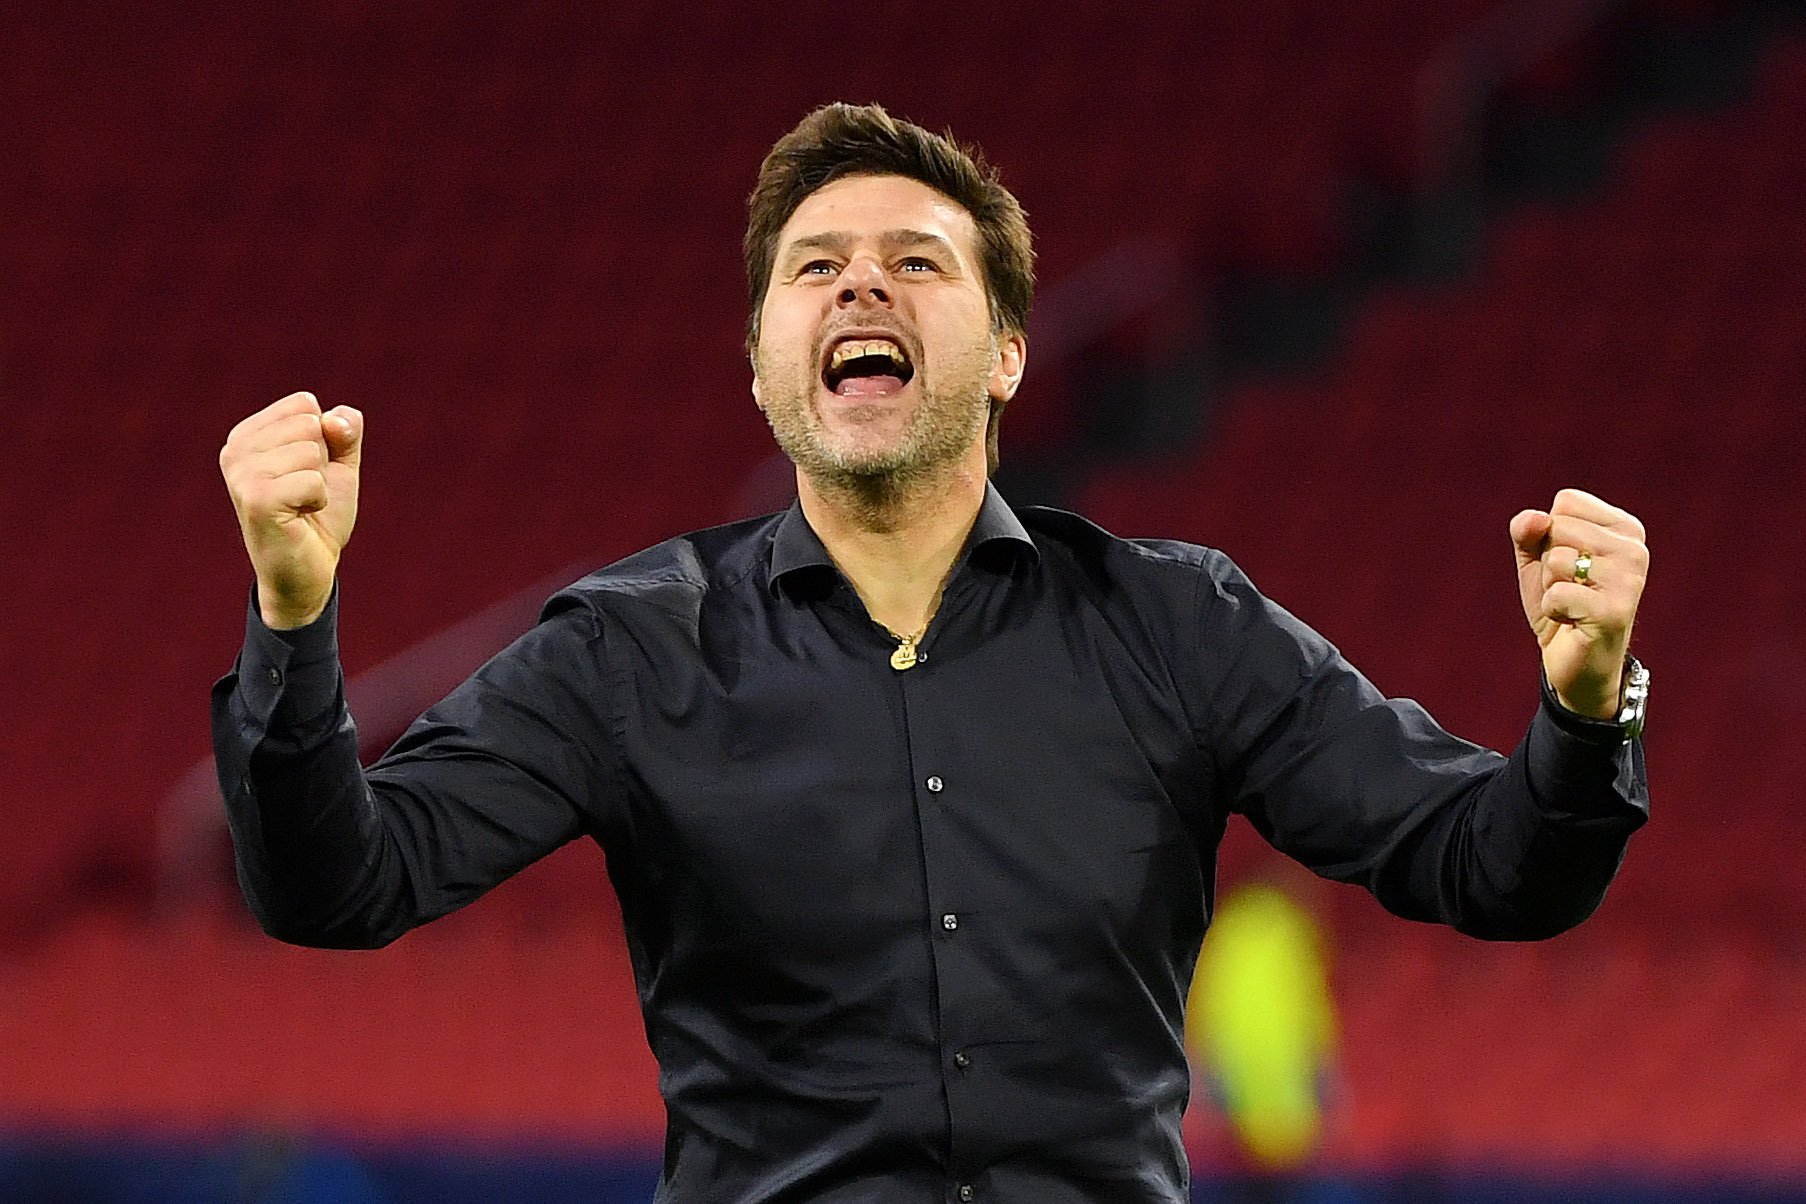 Pochettino ‘desires’ to become Juventus manager, reveals cousin